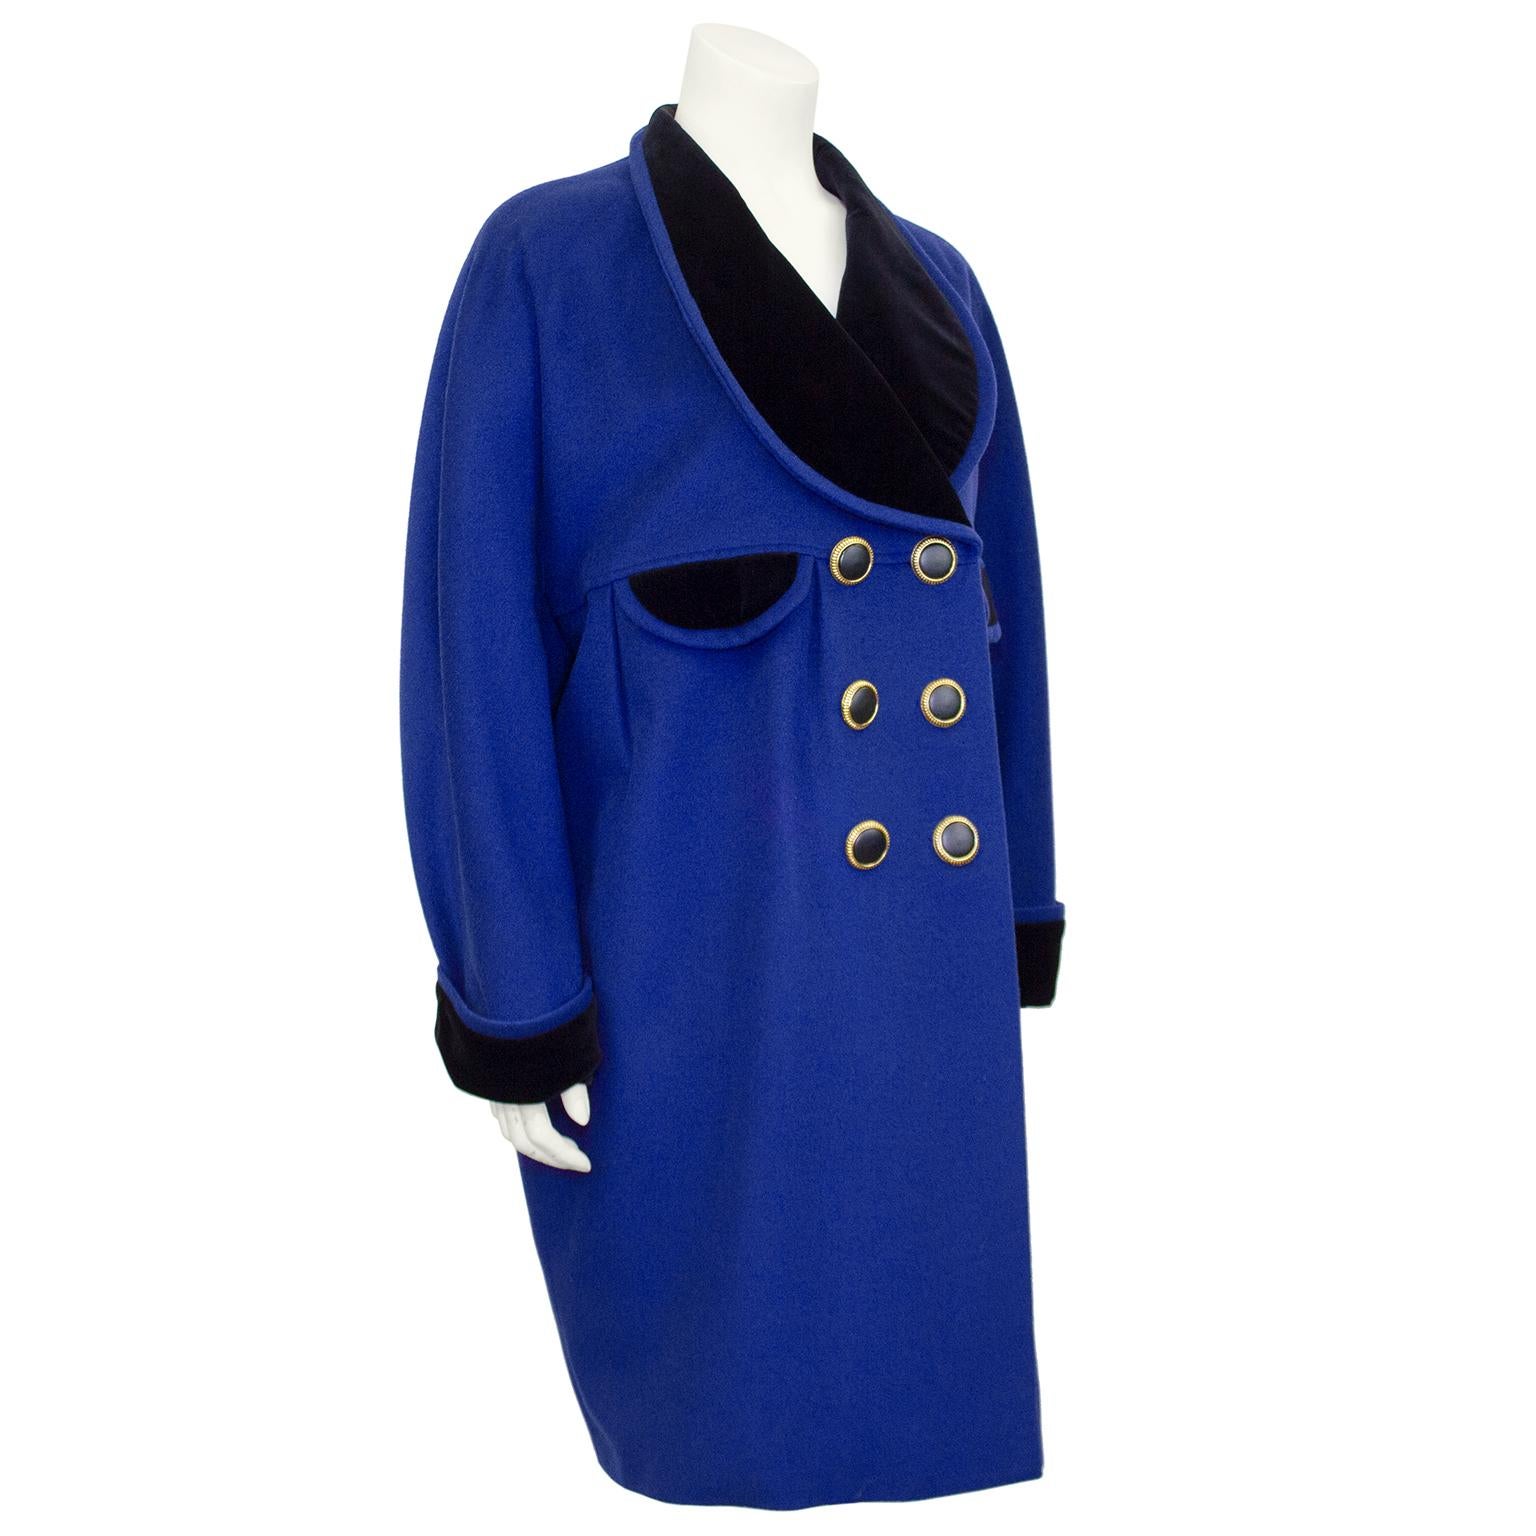 Great Karl Lagerfeld cocoon style coat from the 1980s. Royal blue wool with contrasting black velvet over sized shawl collar, cuffs and demi lune faux pocket flaps. Double breasted with large gold tone metal and black buttons. Beautiful draping with